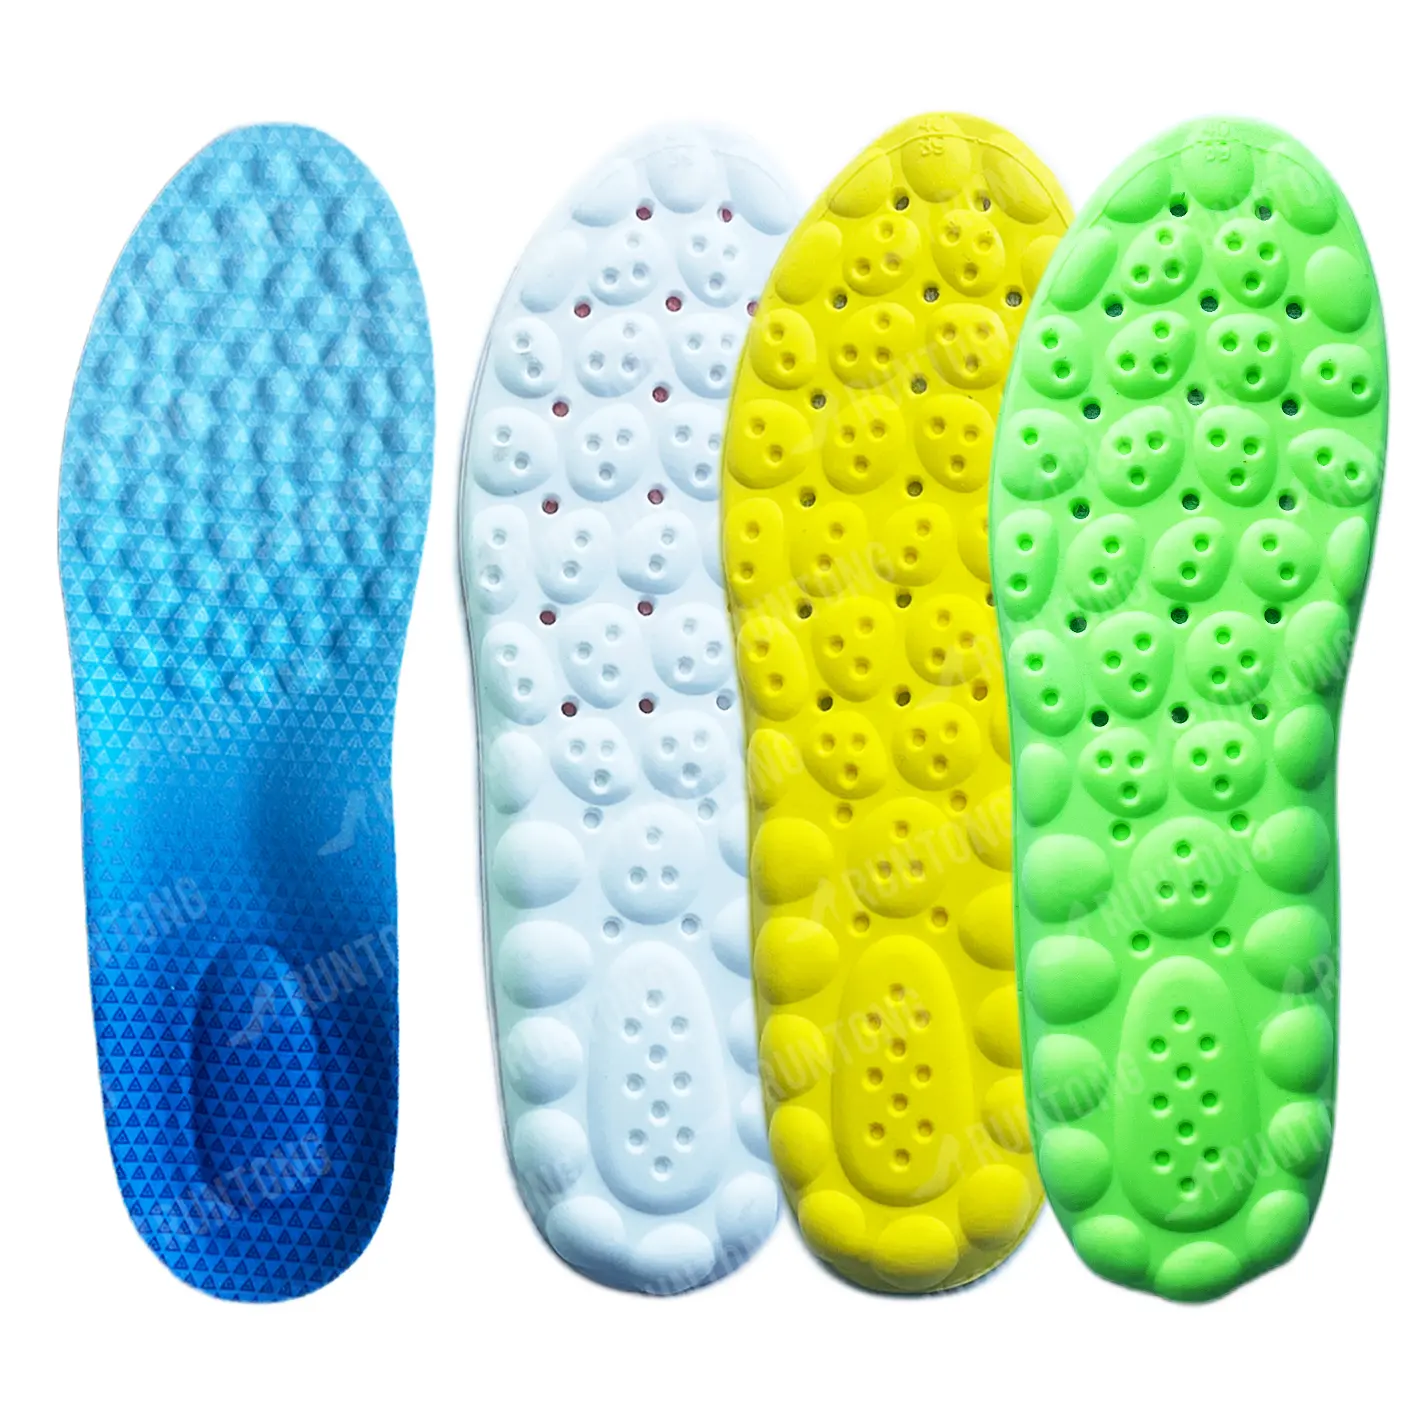 4D Sports Insoles for Shoes PU Sole Shoe Insert Soft Shock Absorption Comfort Running Sports Insoles